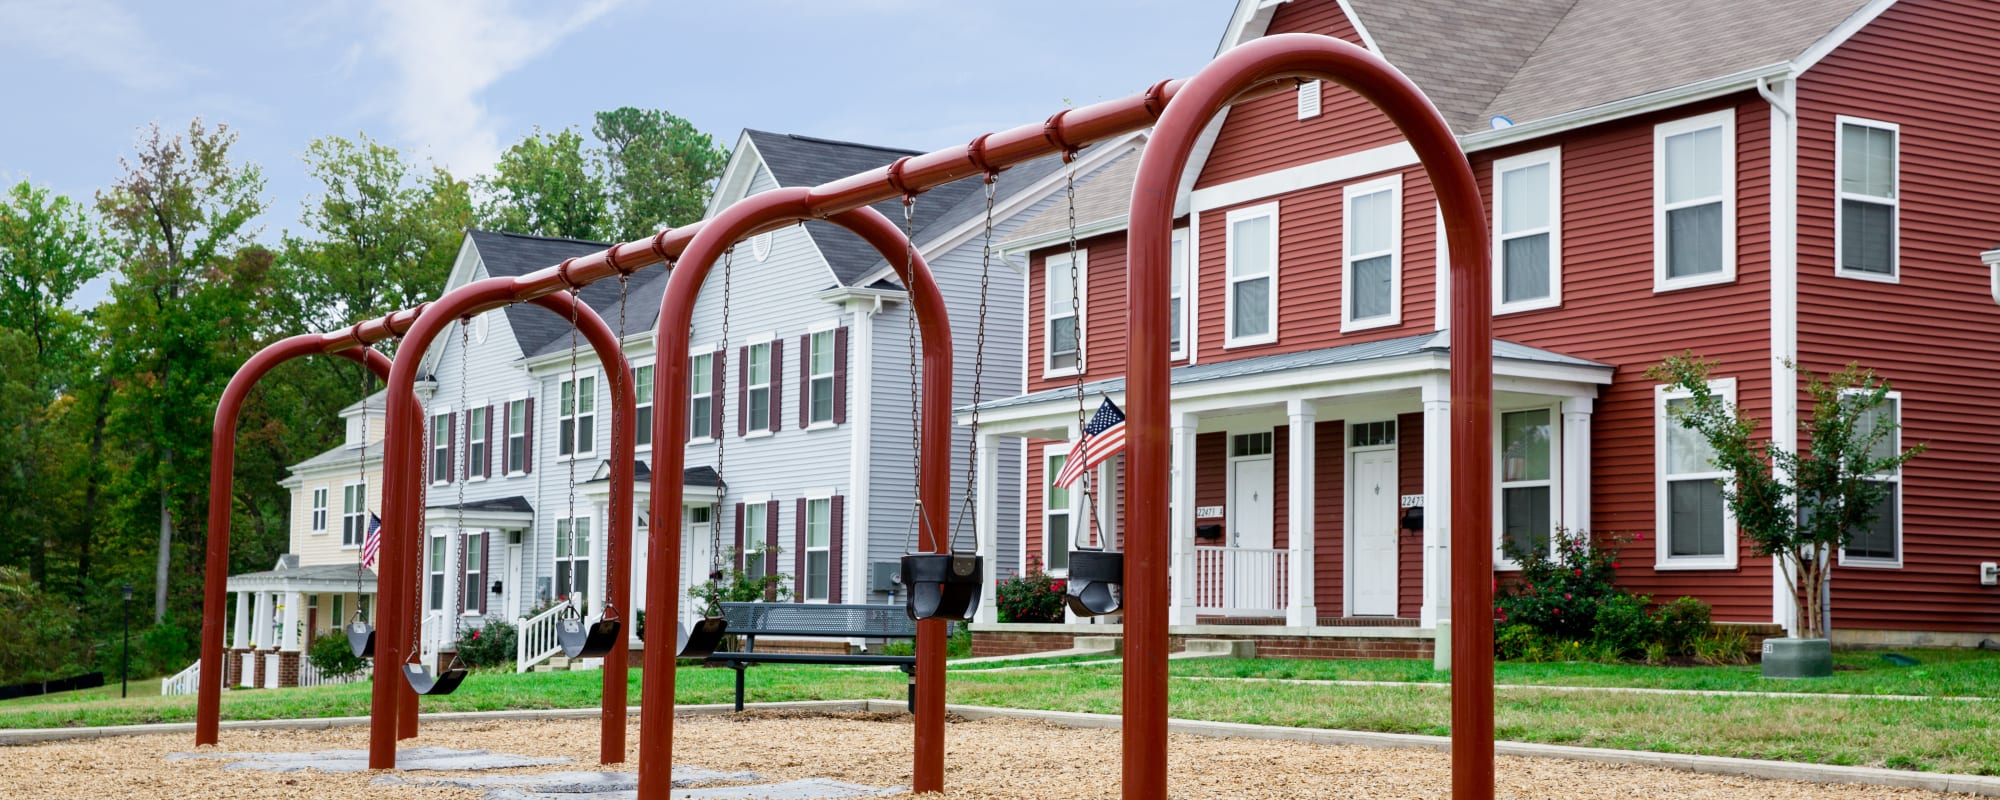 A playground with swings at Challenger Estates in Patuxent River, Maryland